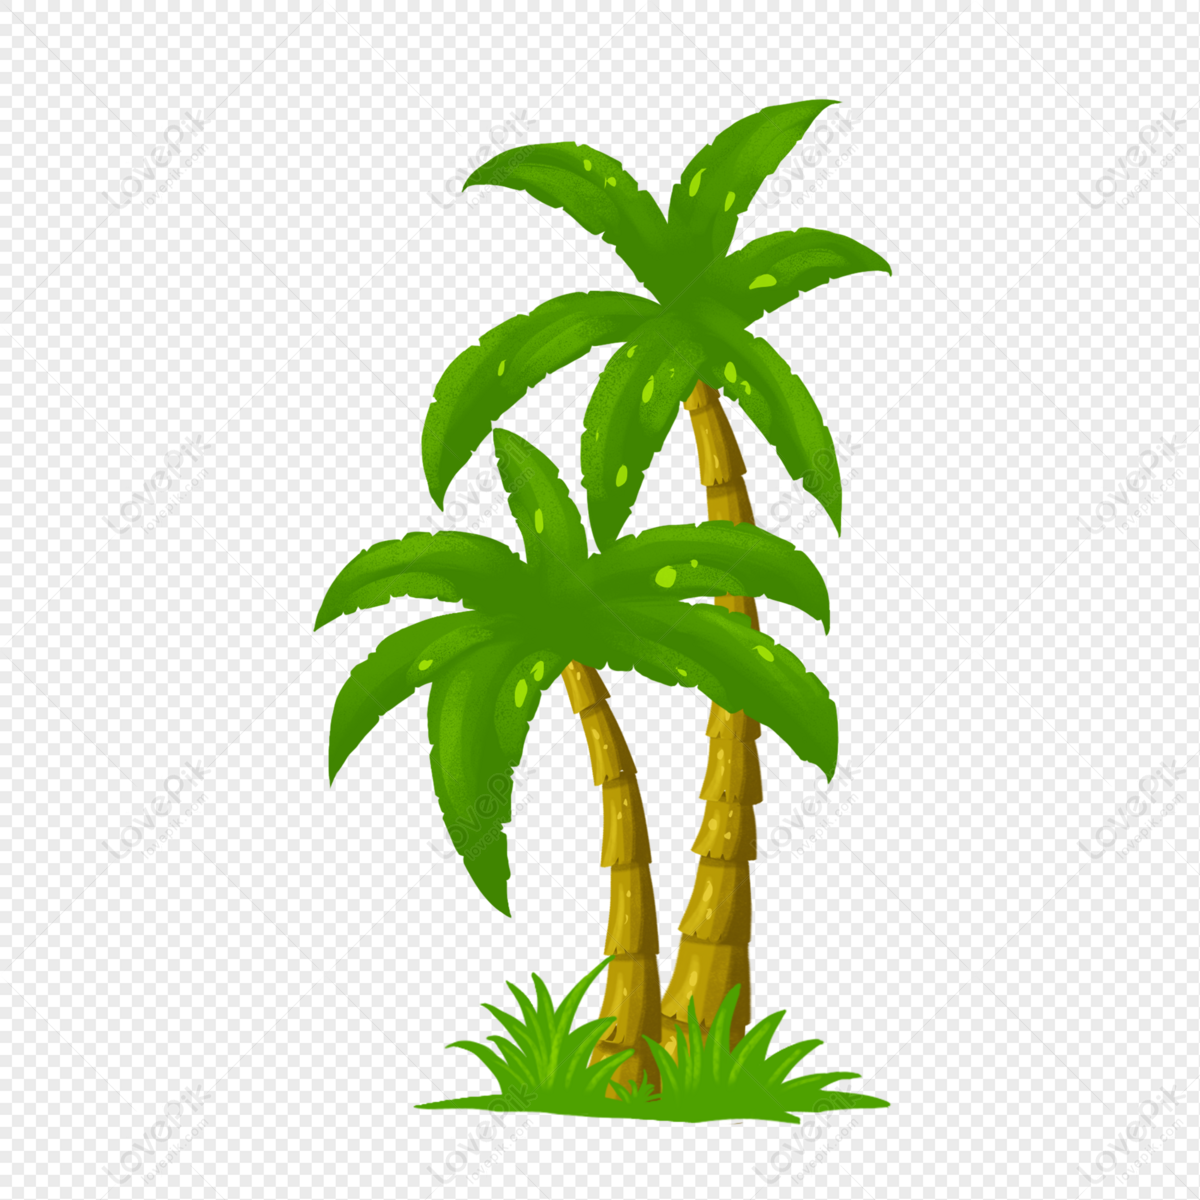 Hand Drawn Cartoon Coconut Tree PNG Hd Transparent Image And Clipart Image  For Free Download - Lovepik | 401259934